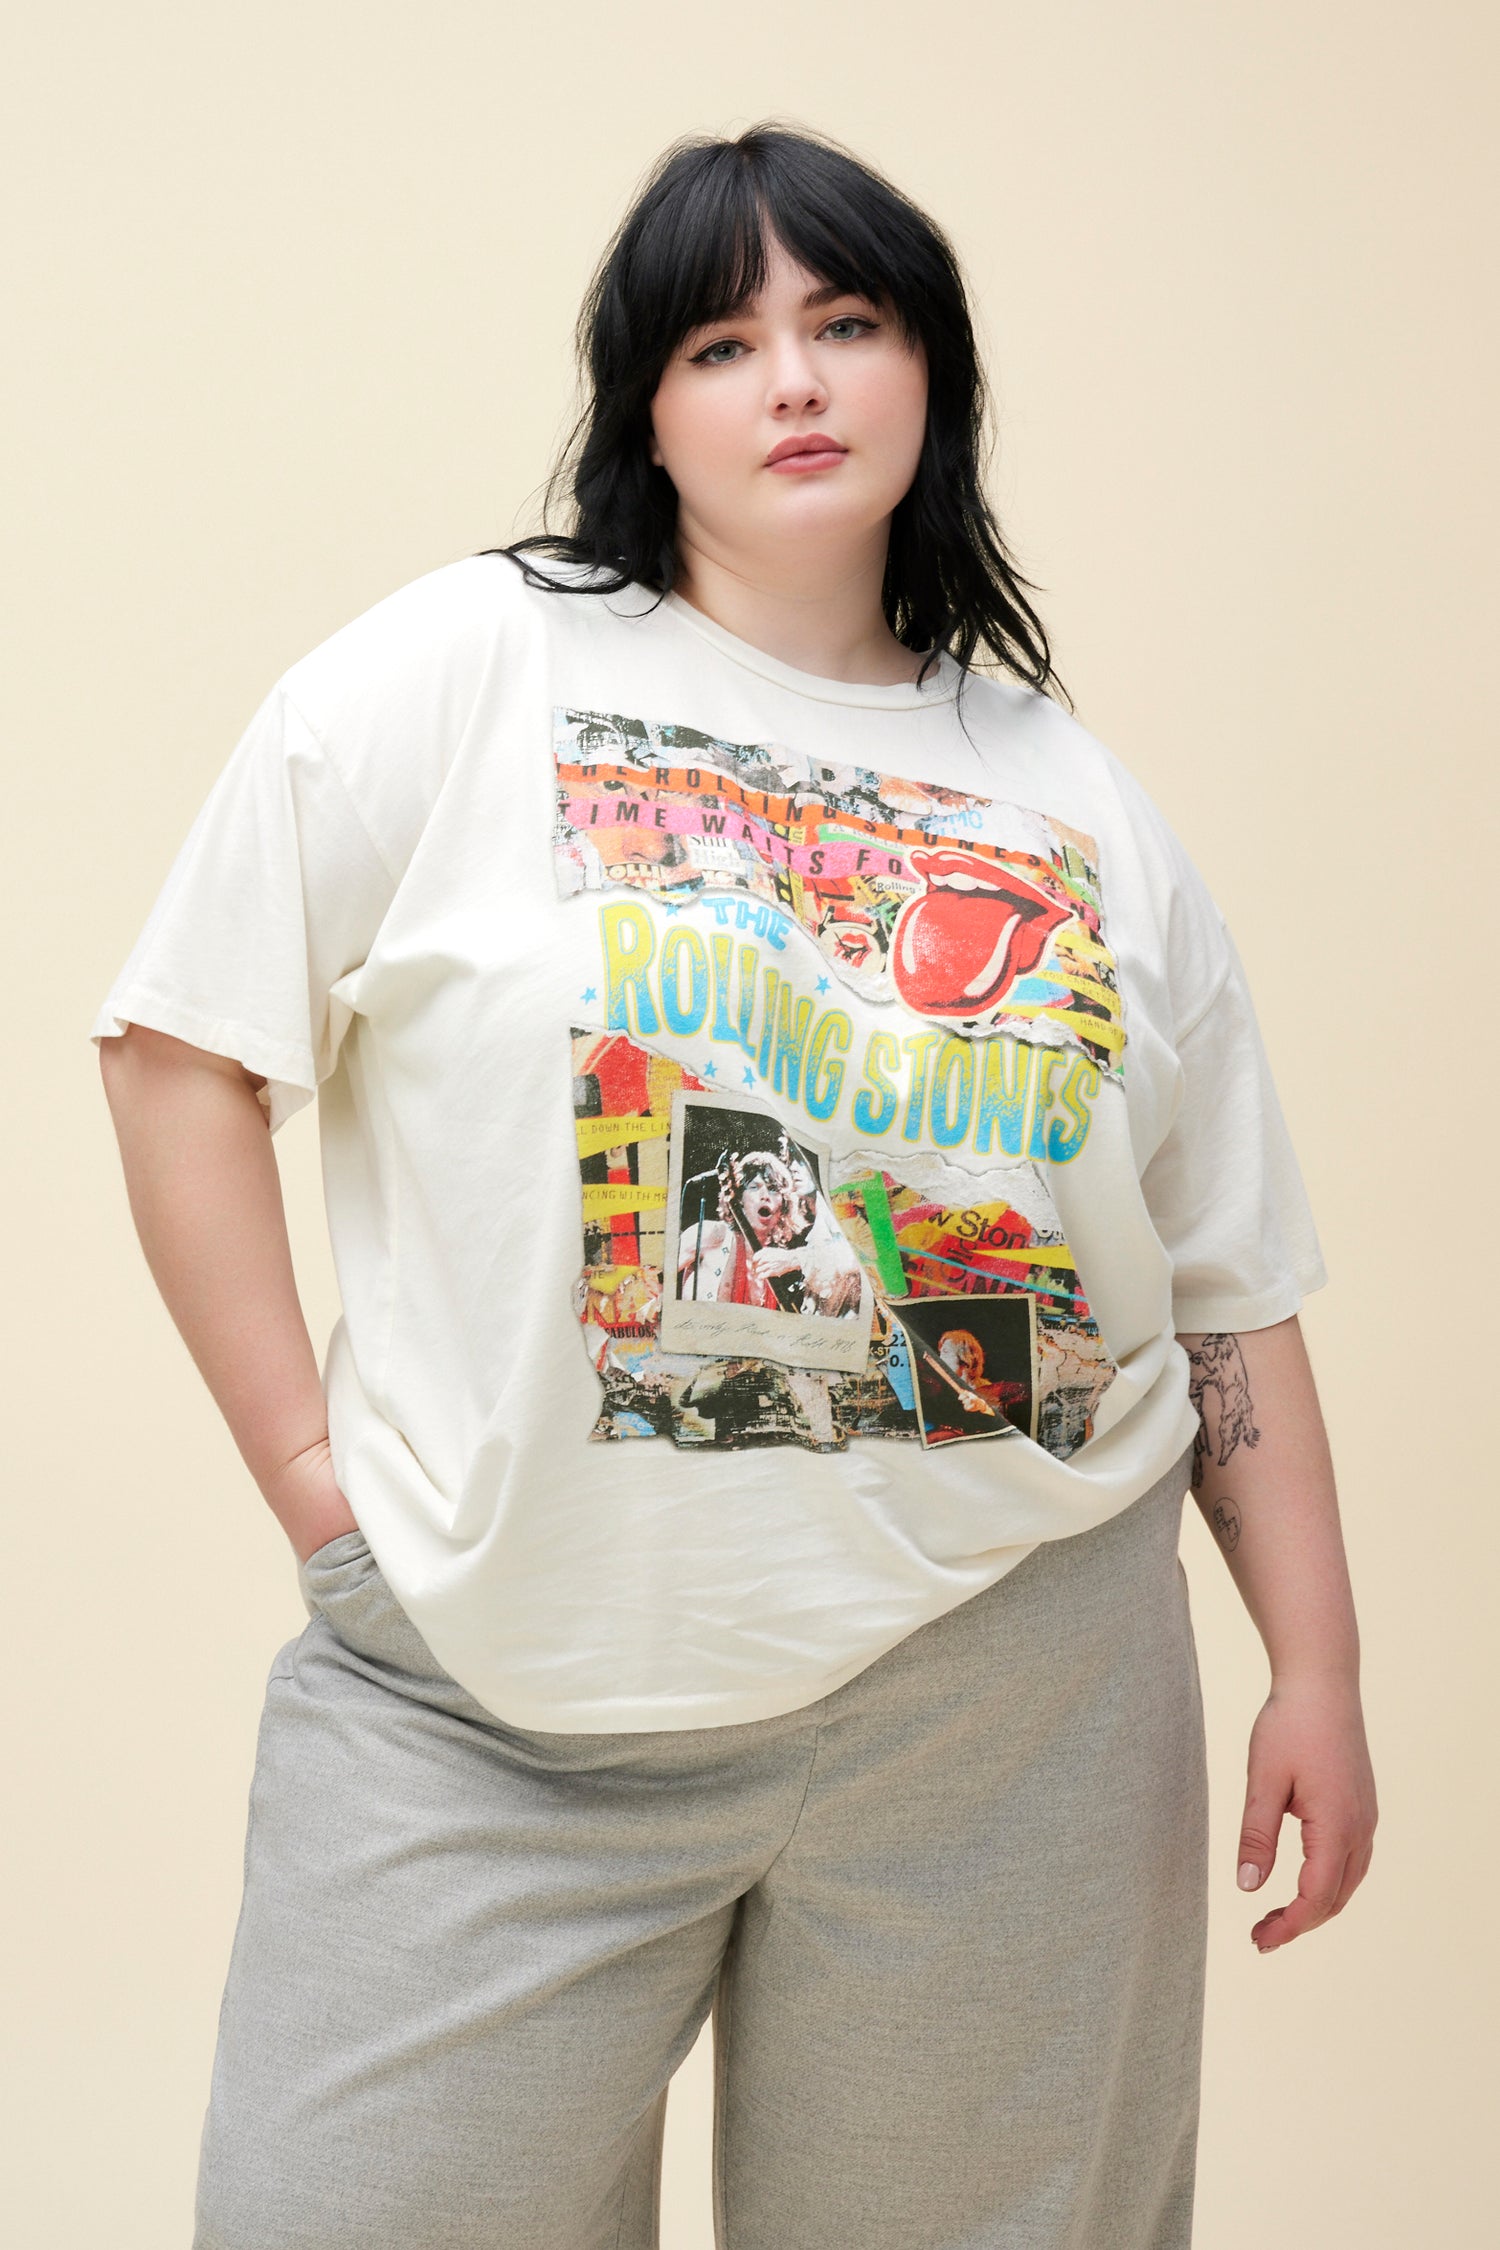 A model featuring a white tee ES stamped with 'The Rolling Stones' with collage pictures of the band performing at concerts.